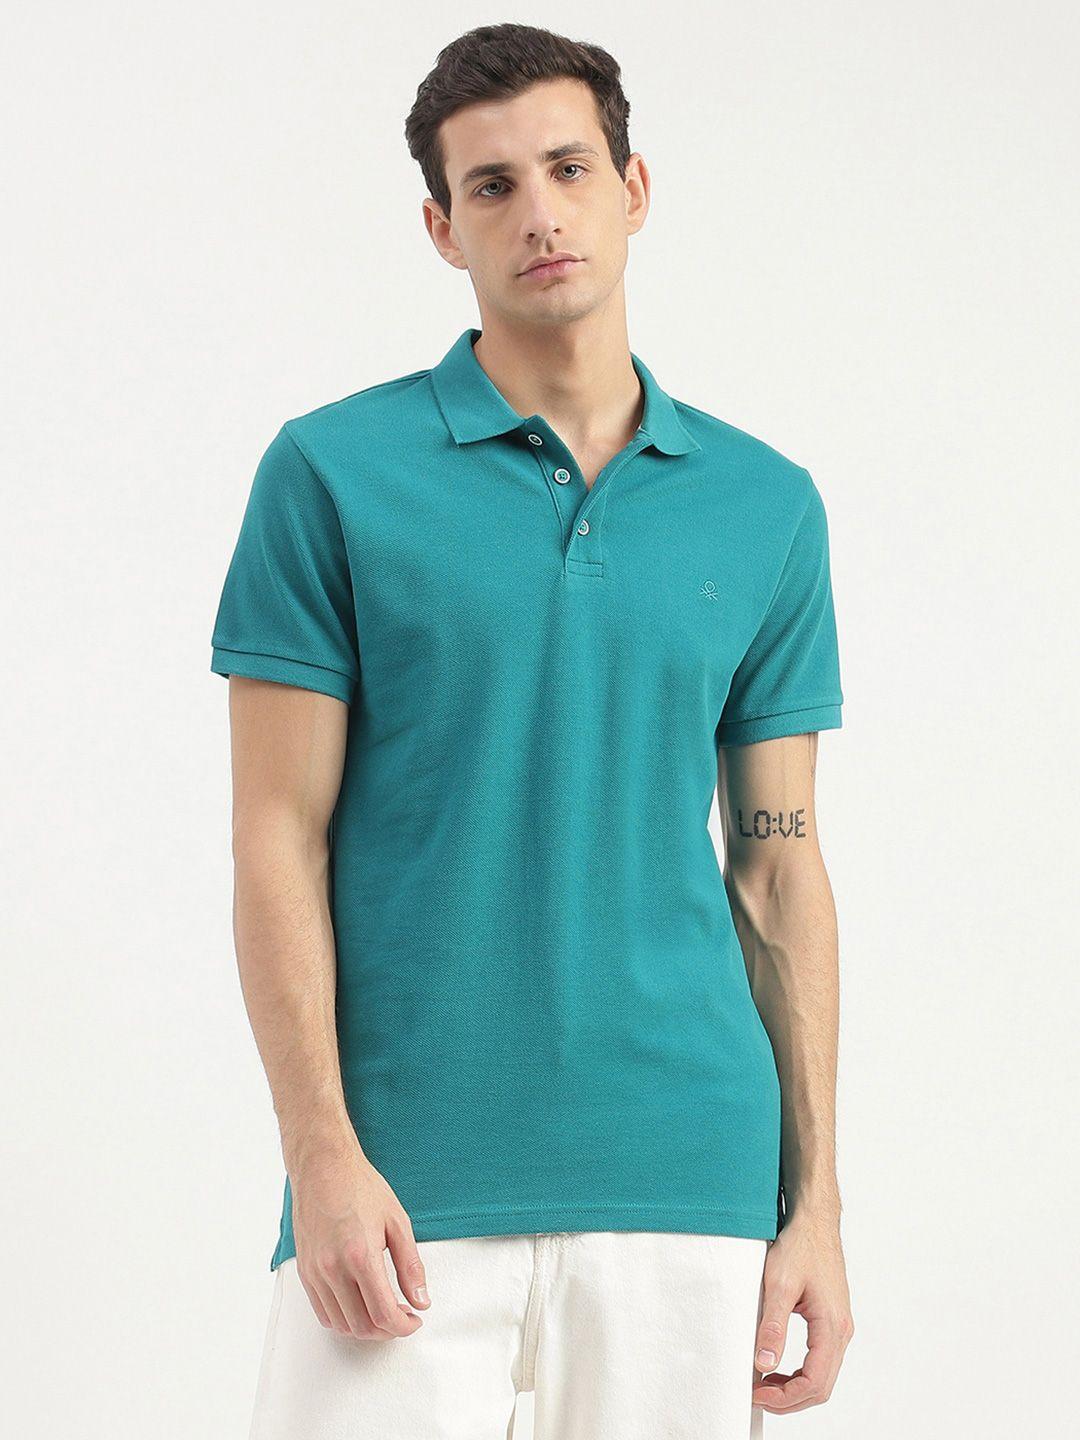 united-colors-of-benetton-polo-collar-short-sleeves-cotton-casual-t-shirt